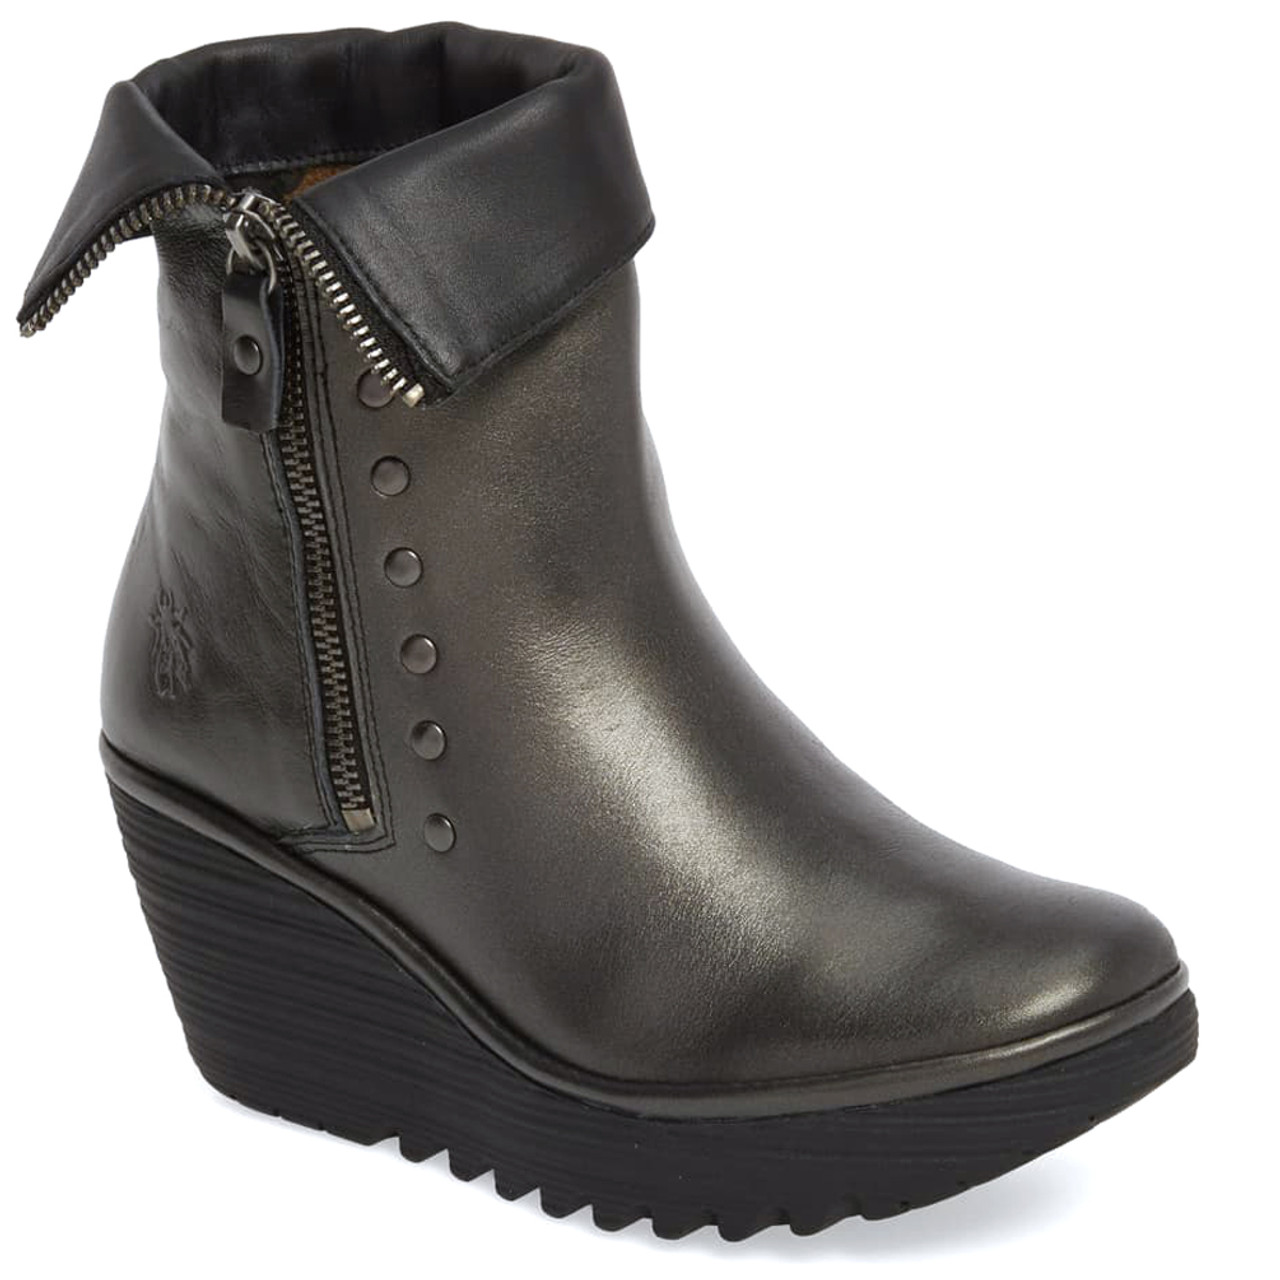 FLY London Women's Ankle Boots